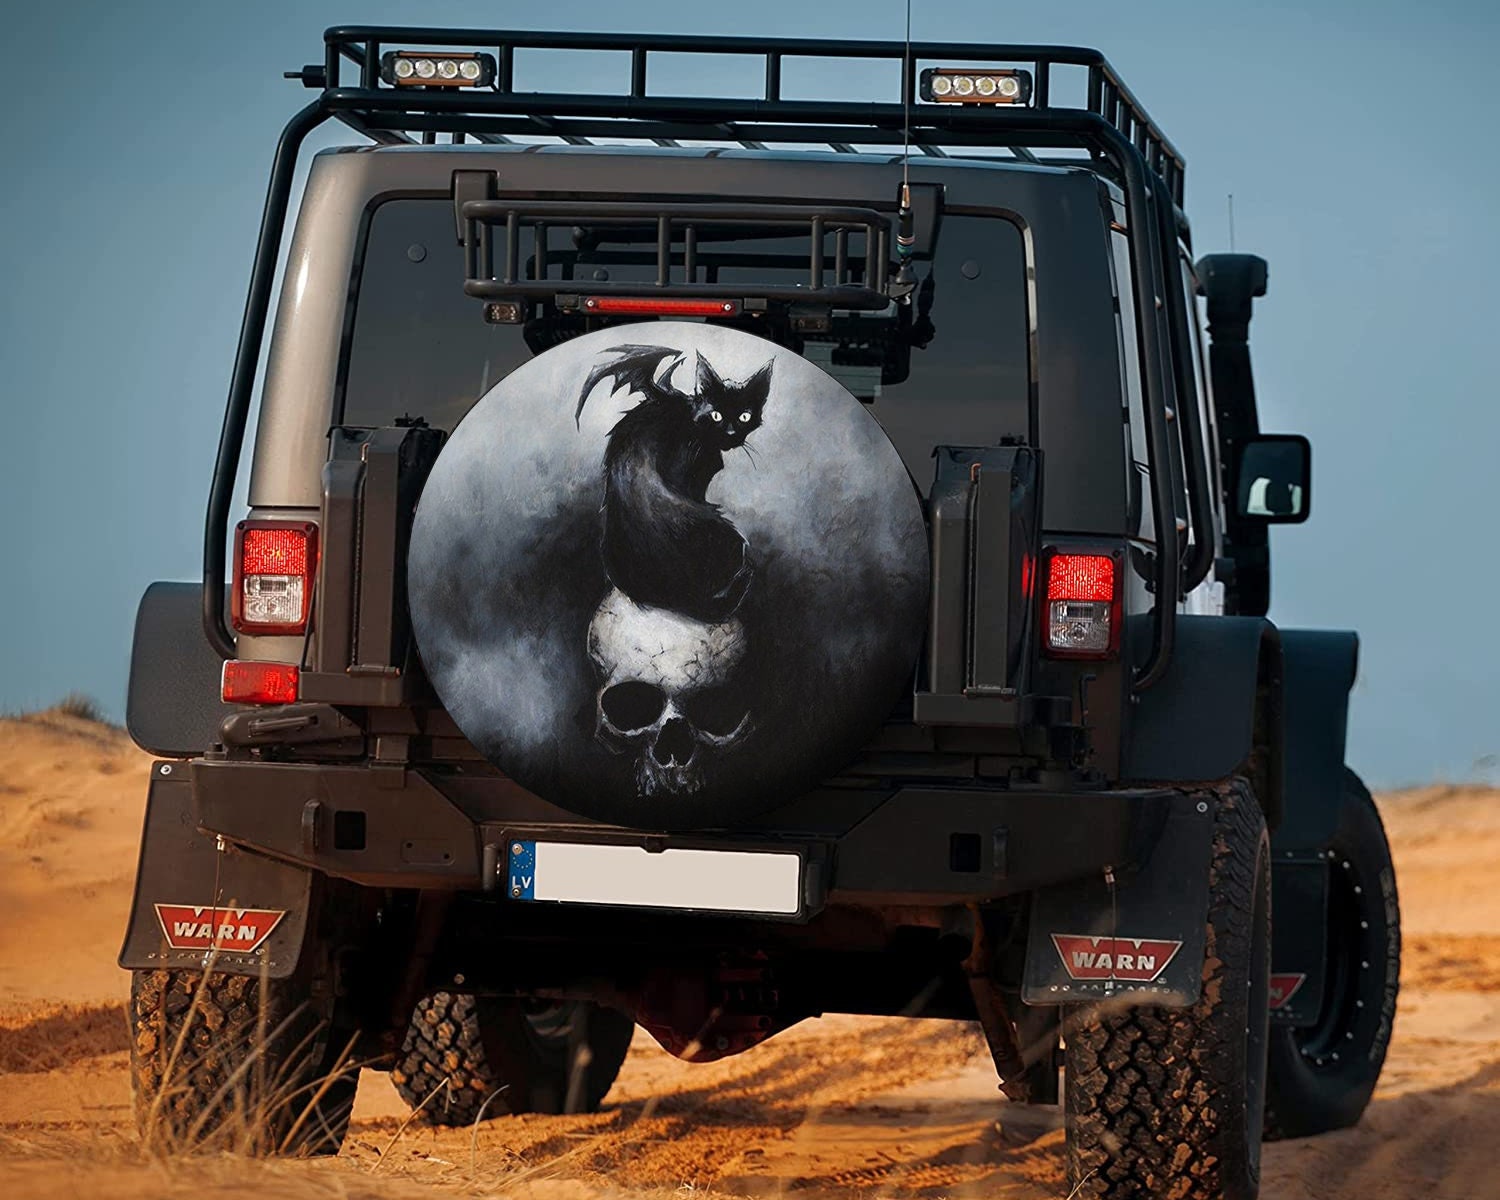 Discover Black Cat Halloween Spare Tire Cover, Halloween Tire Cover